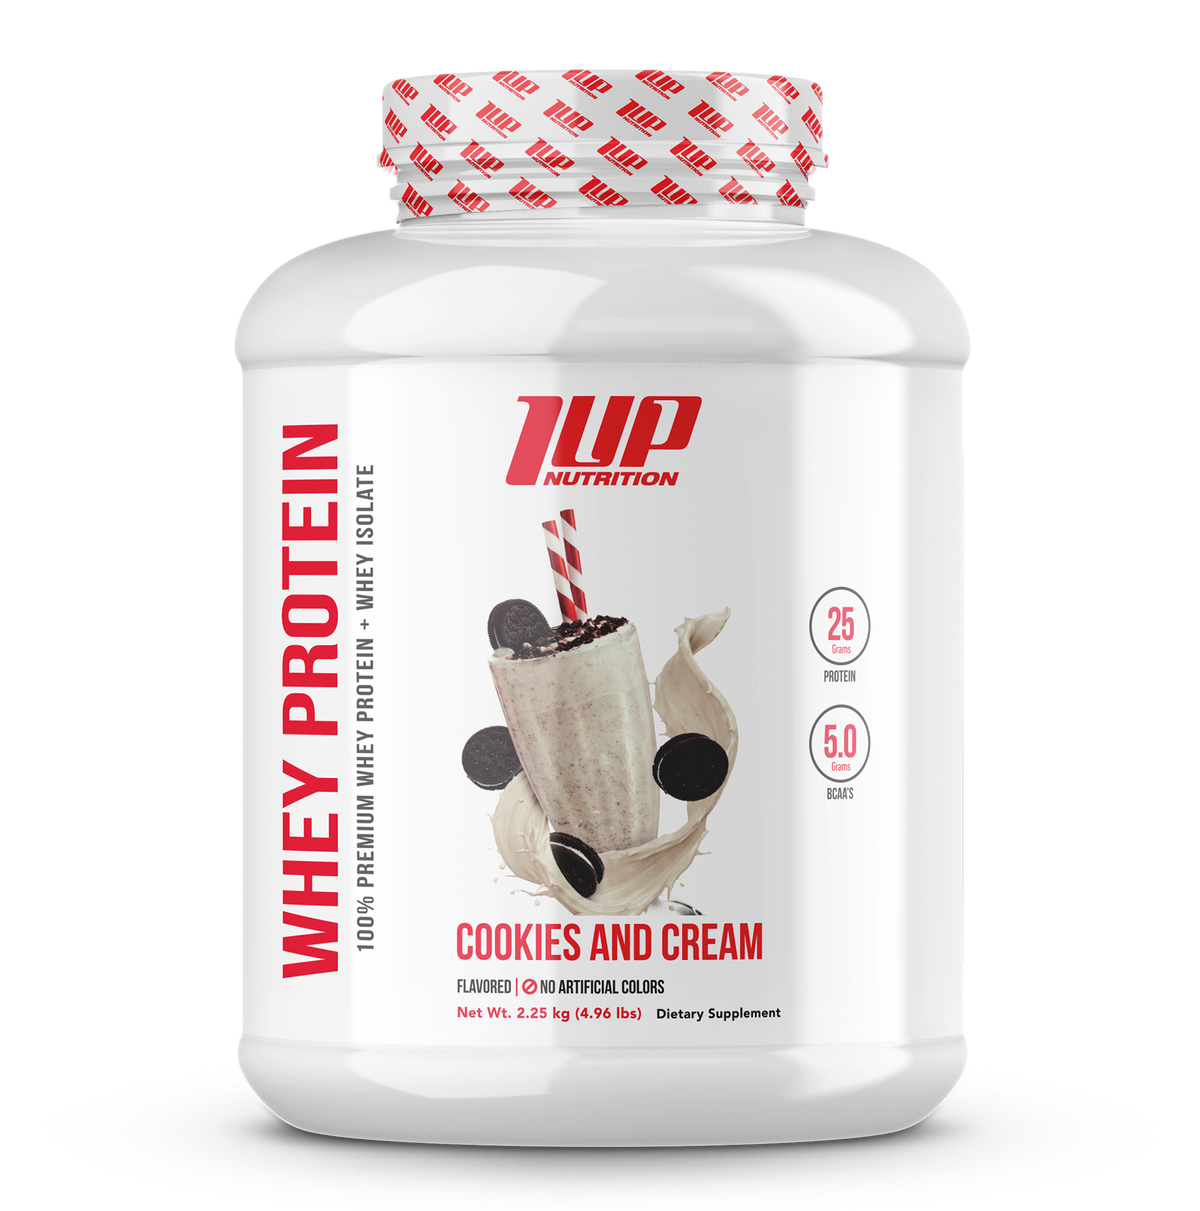 Proteína 1UP WHEY Protein 5 LB